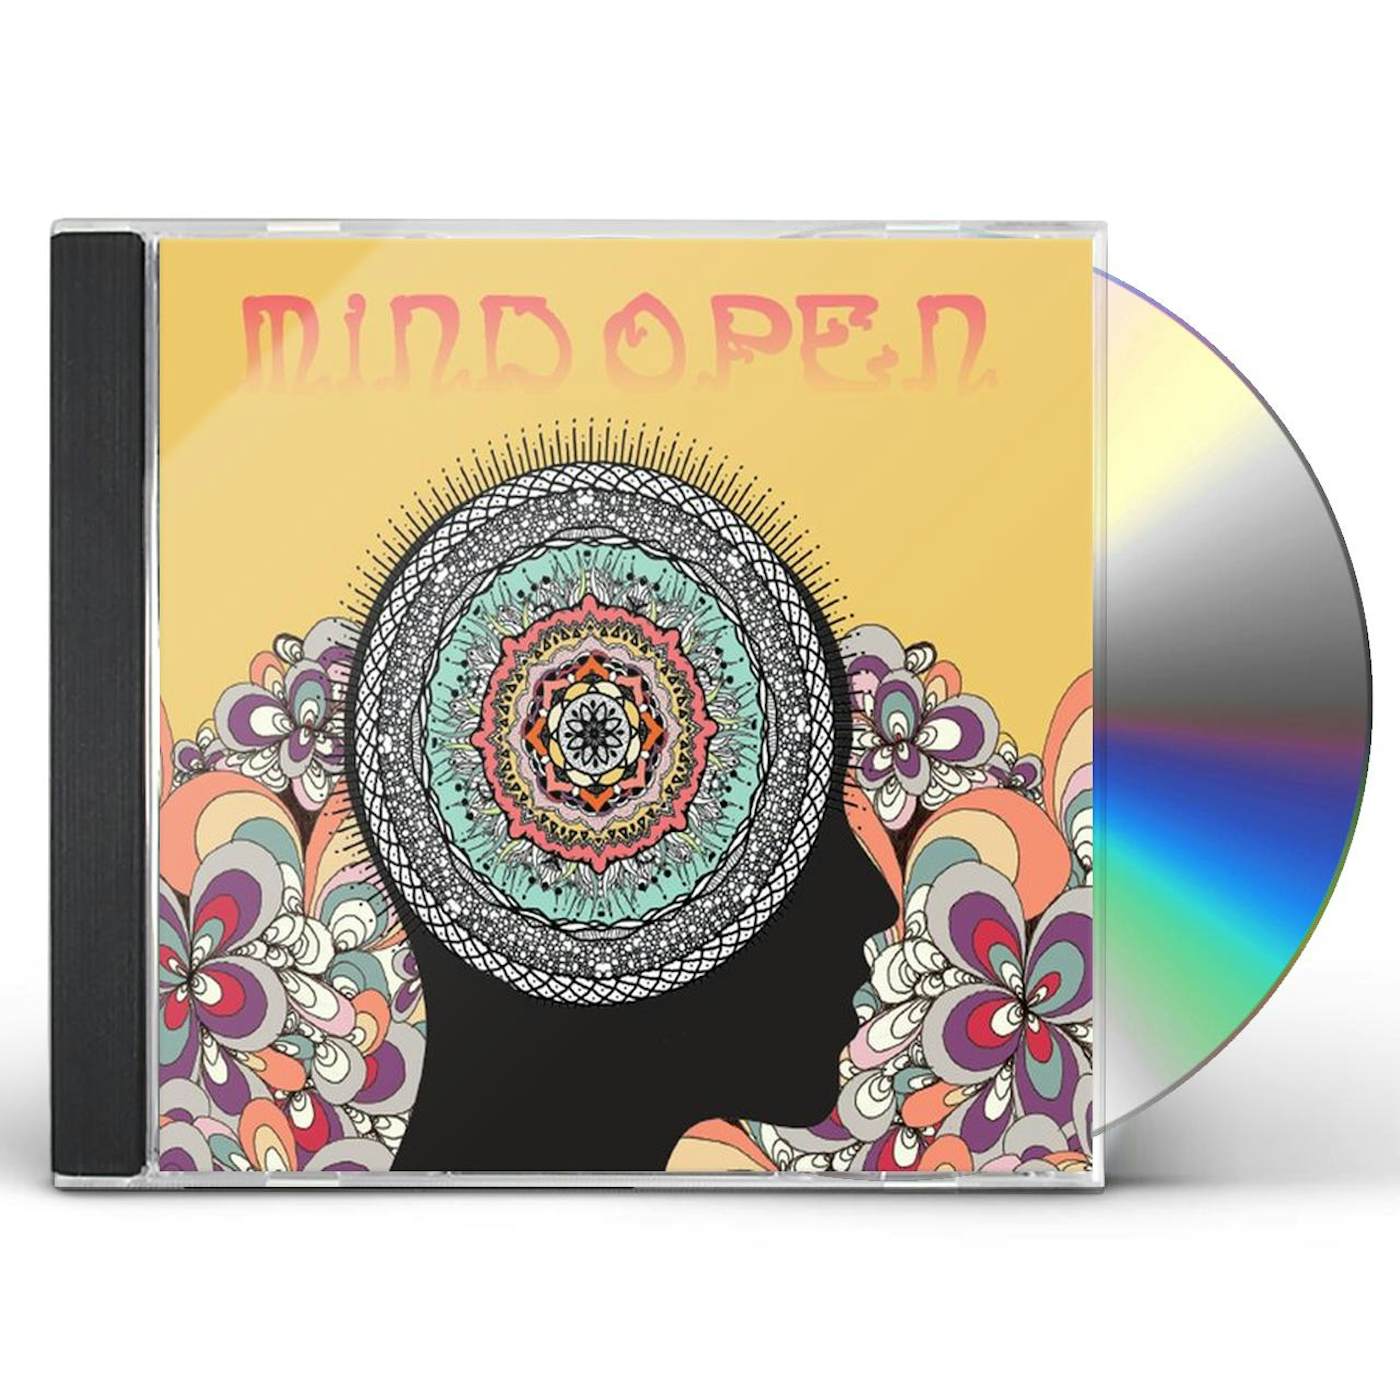 The Open Mind CD